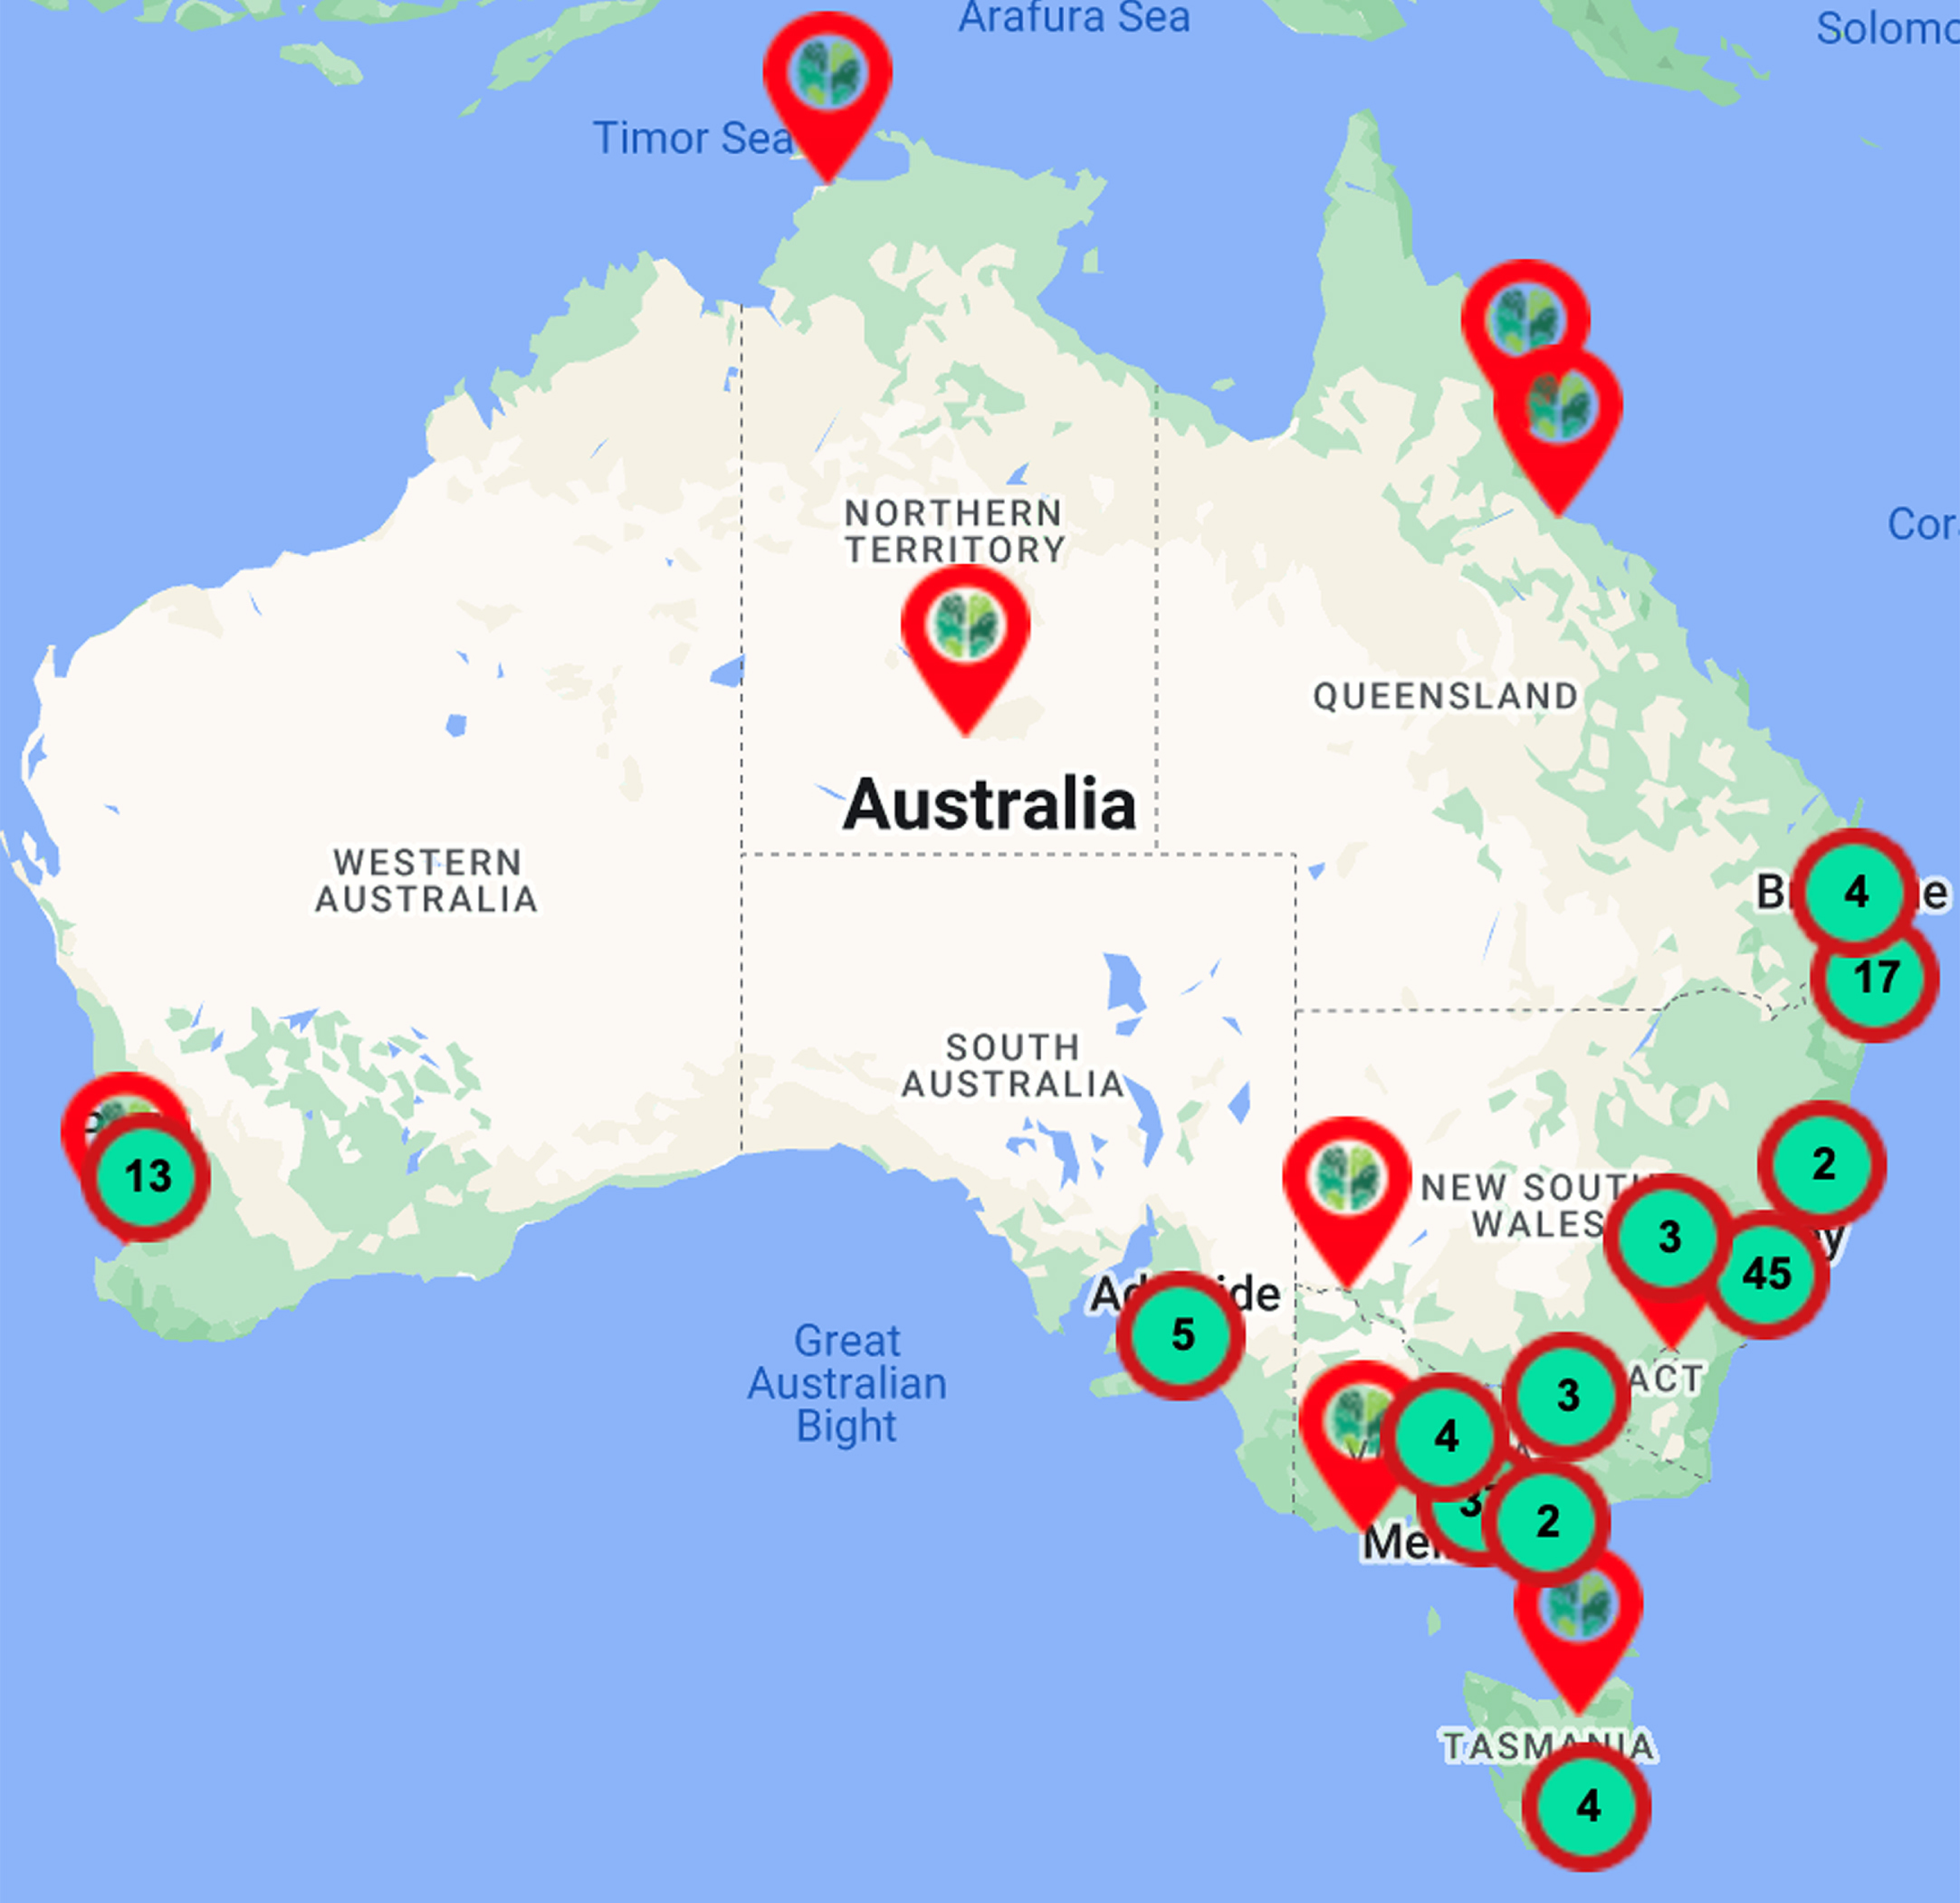 Memory and cognition services (n = 149) mapped across Australia as of November 2022.